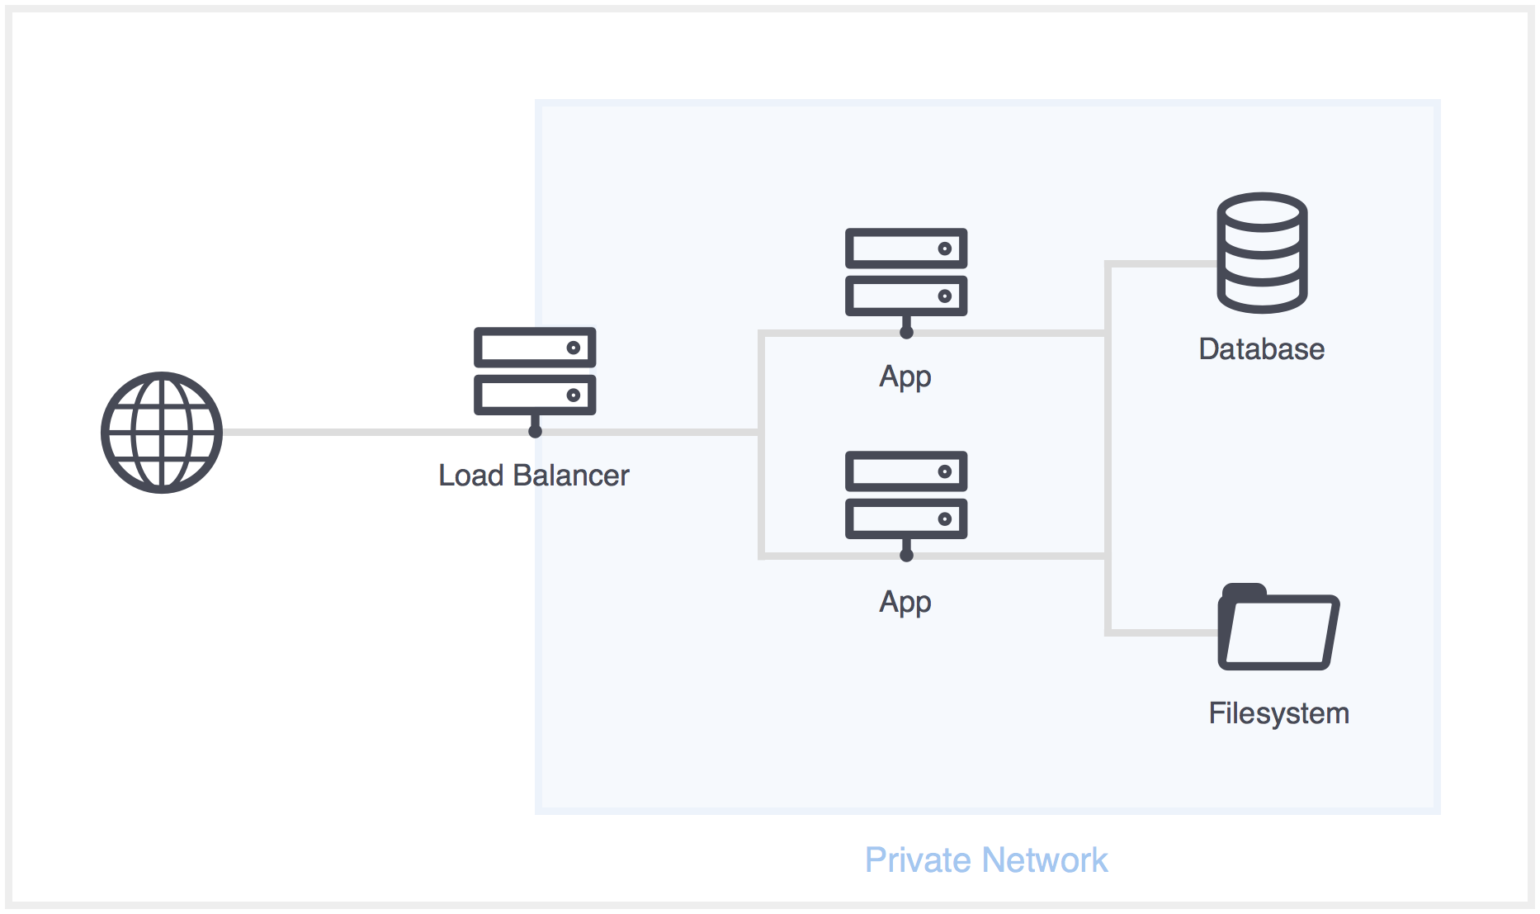 Planned server architecture